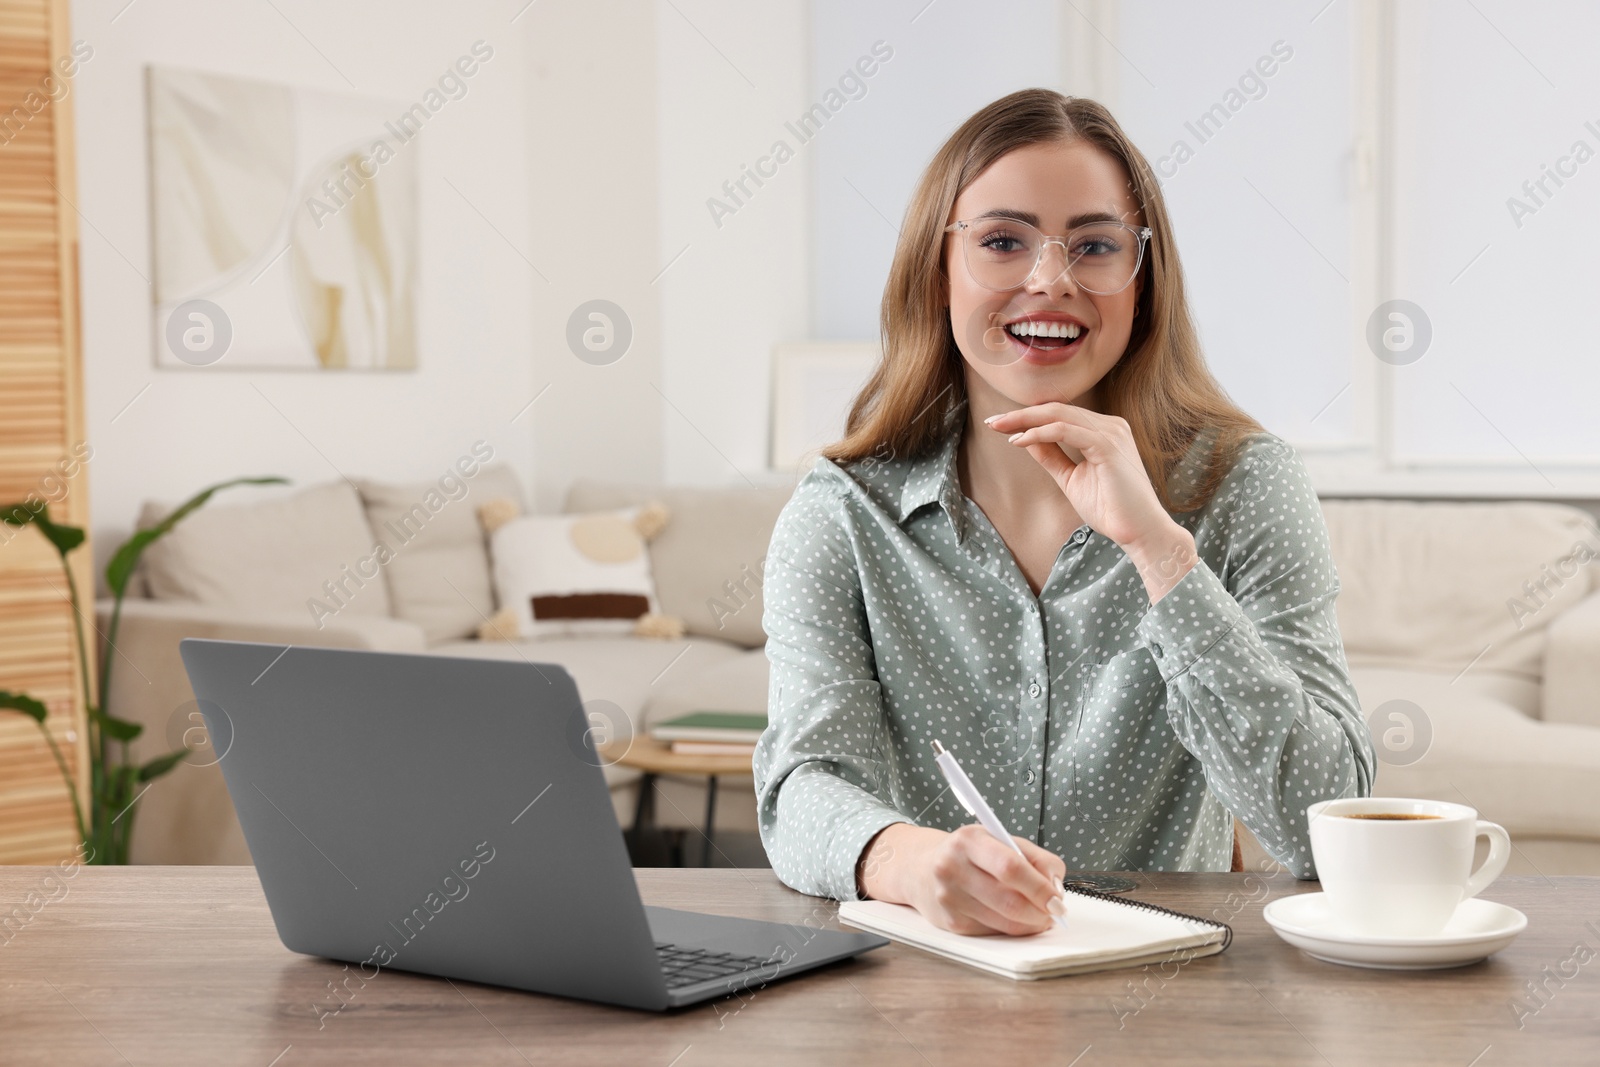 Photo of Happy woman with notebook and laptop at wooden table in room